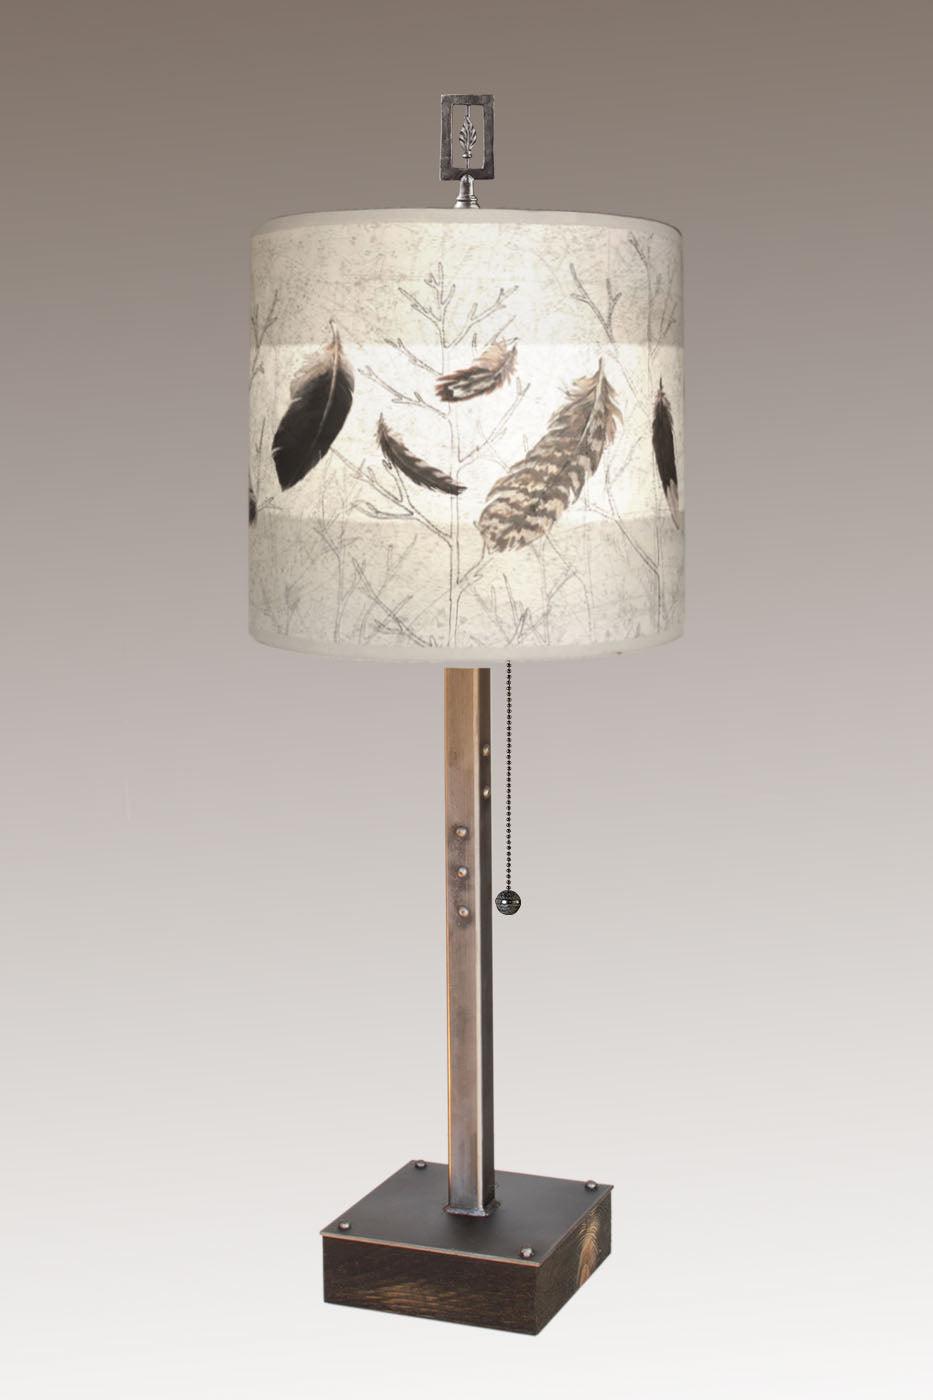 Steel Table Lamp on Wood with Medium Drum Shade in Feathers in Pebble